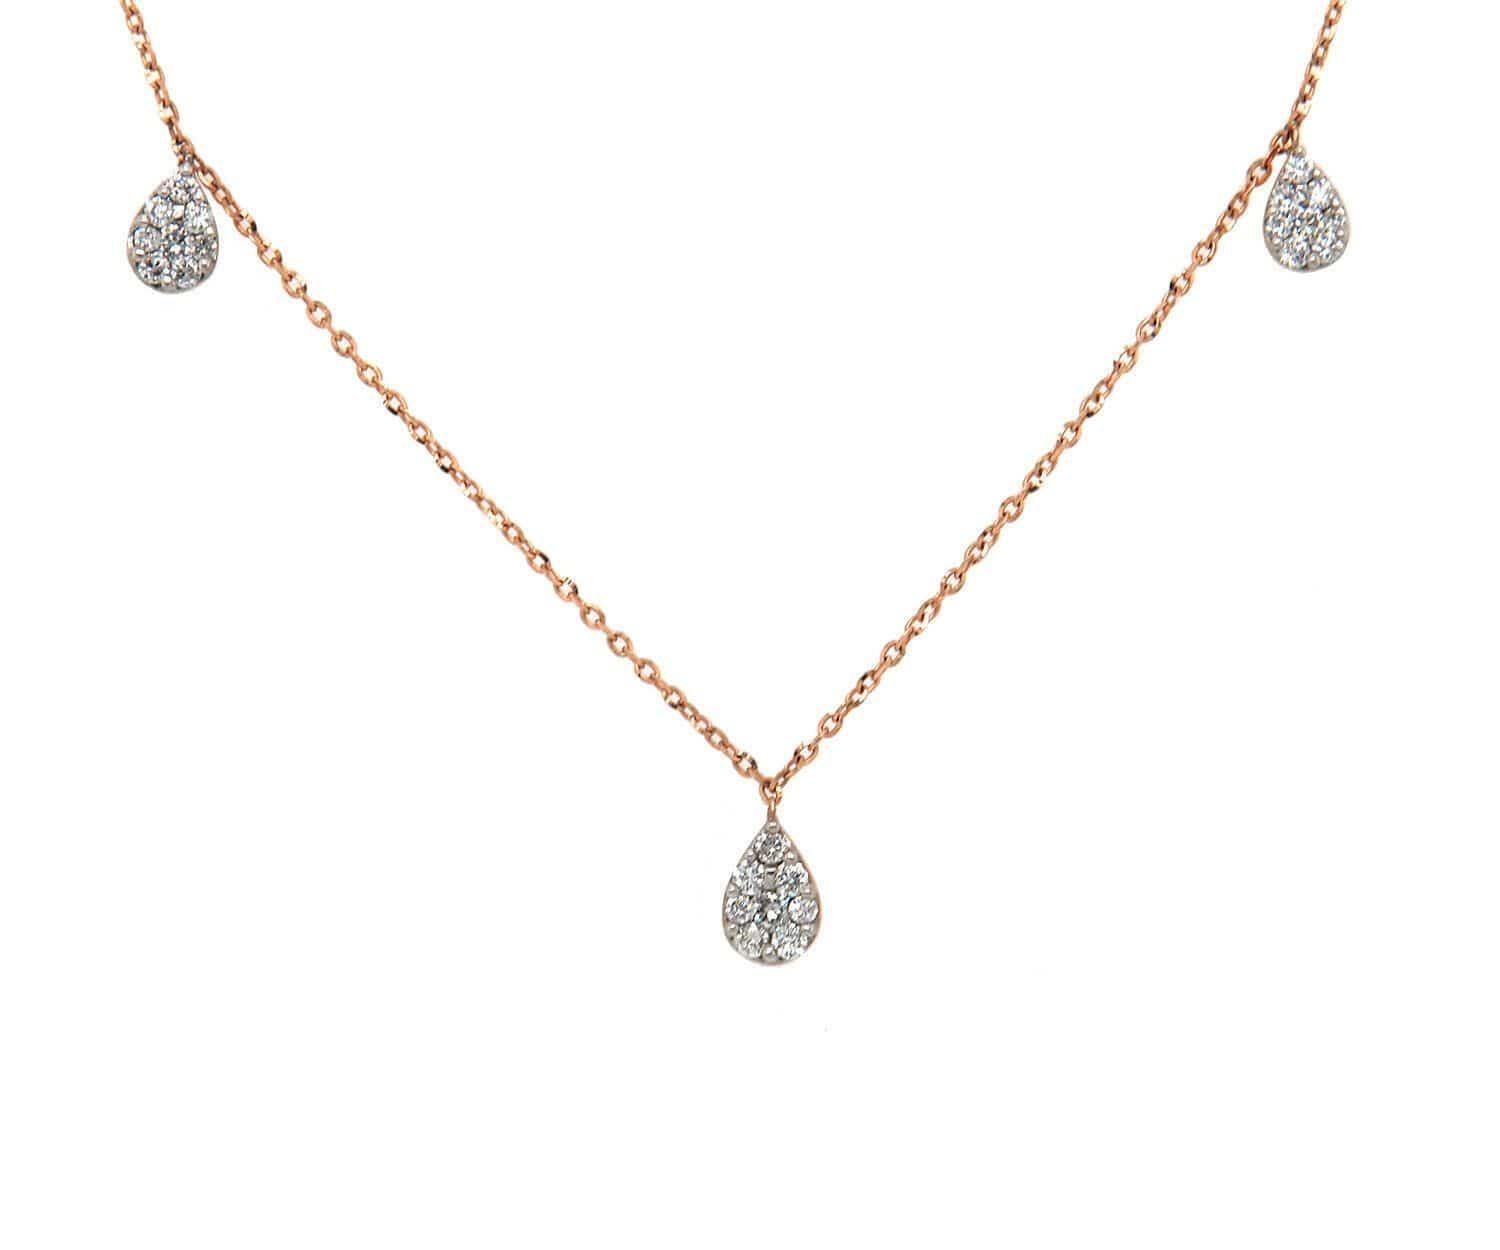 New 0.48ctw Diamond Teardrop Station Necklace in 14K

Diamond Teardrop Station Necklace
14K Rose Gold
Diamonds Carat Weight: Approx. 0.48ctw
Necklace Length: Approx. 18.0 Inches (Adjustable to 17 and 16 Inches)
Weight: Approx. 2.30 Grams
Stamped: